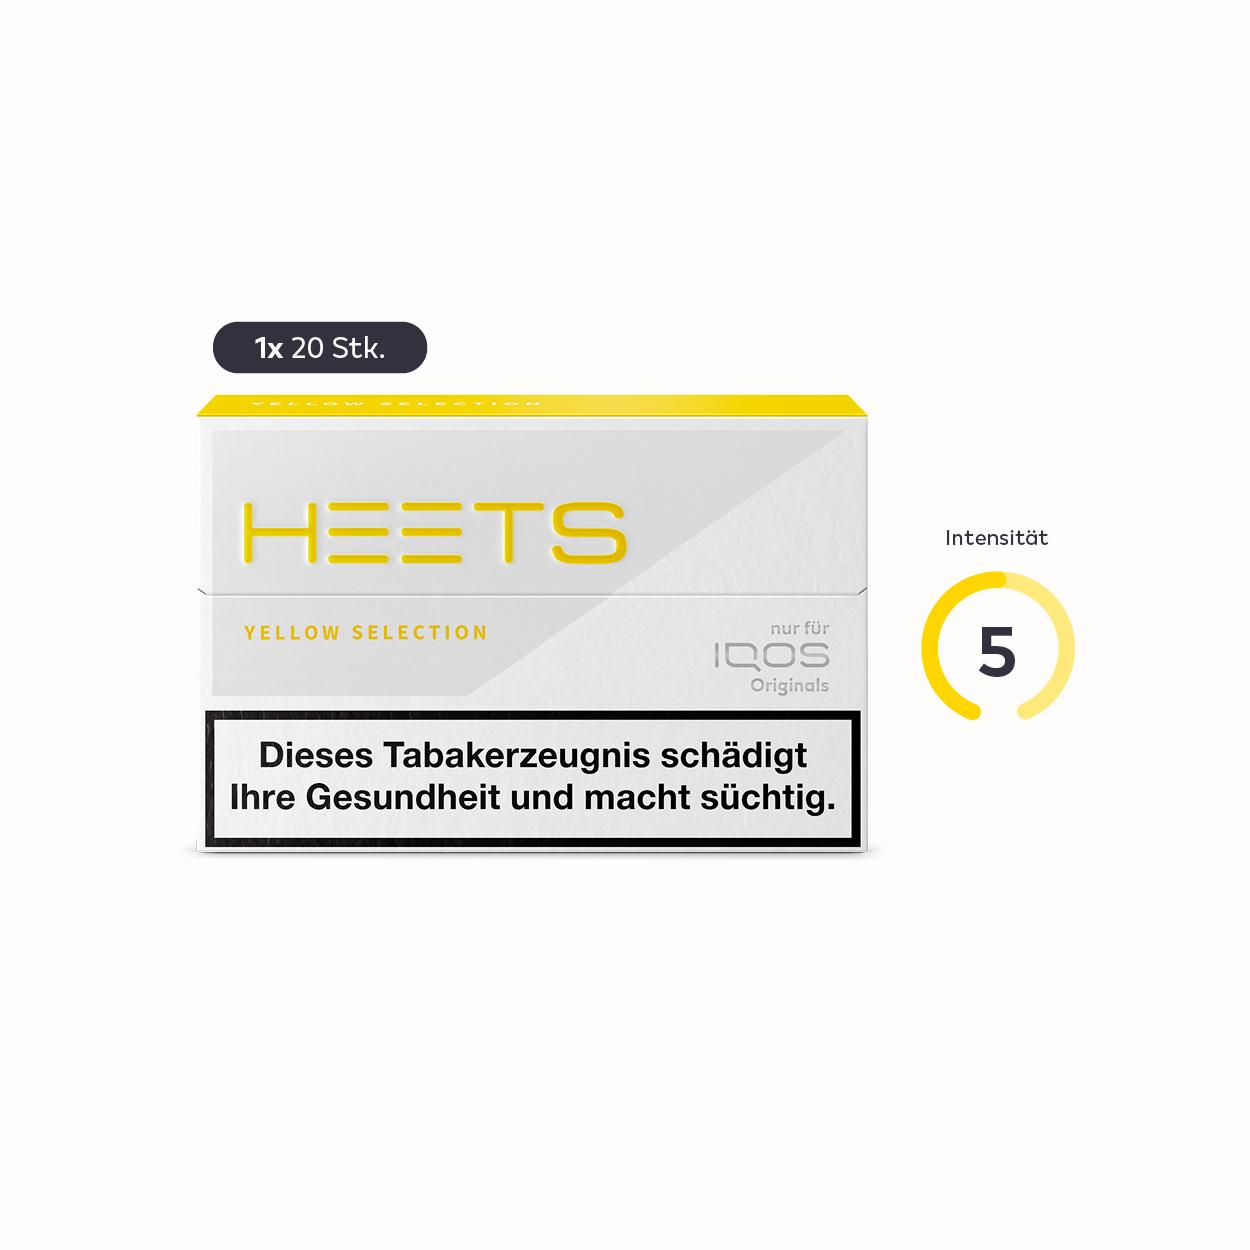 HEETS Yellow Selection | 1 x 20 Tobacco Sticks | 6 Euro pro Packung